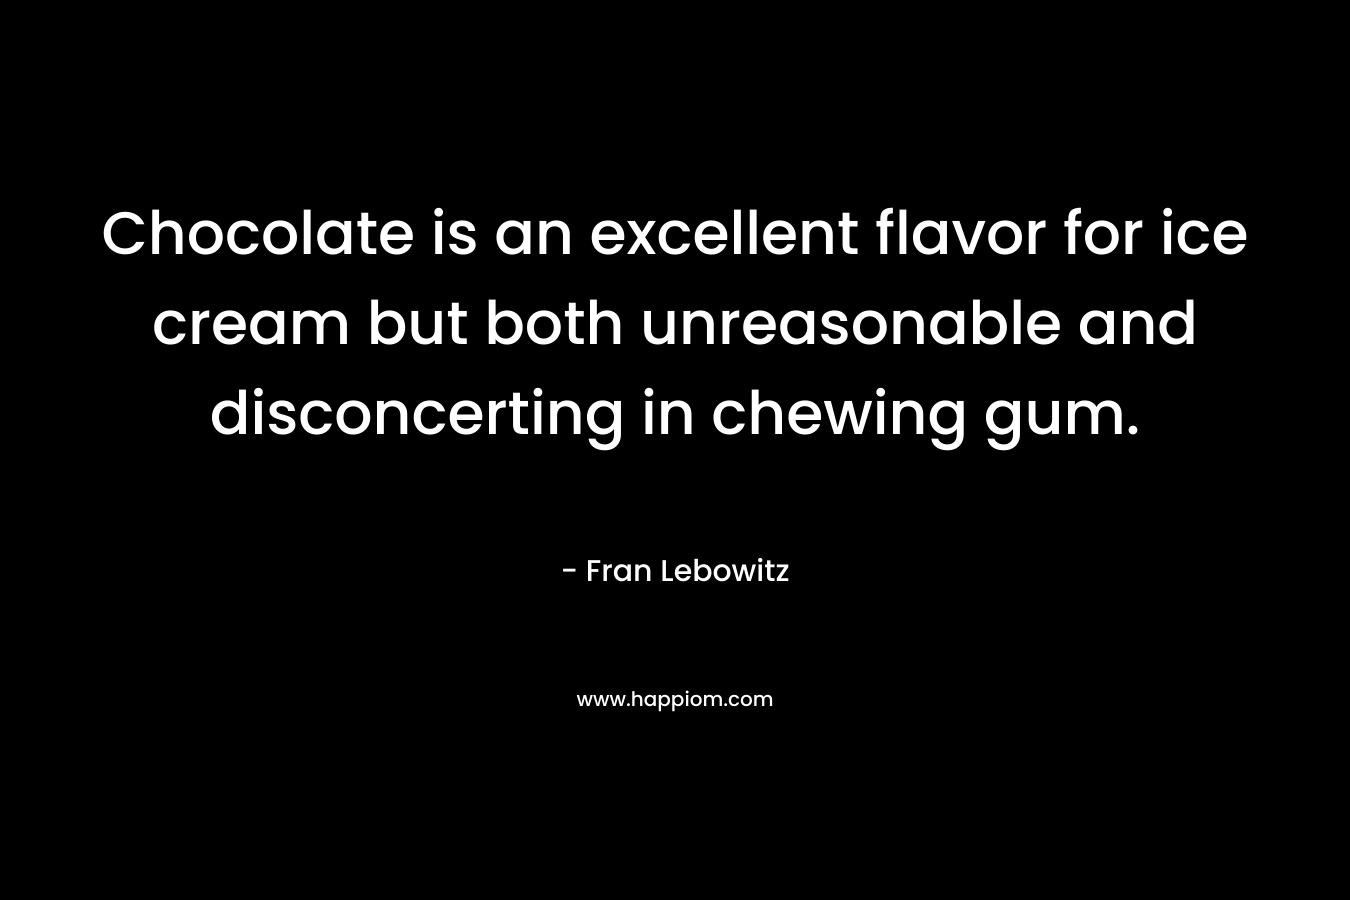 Chocolate is an excellent flavor for ice cream but both unreasonable and disconcerting in chewing gum.